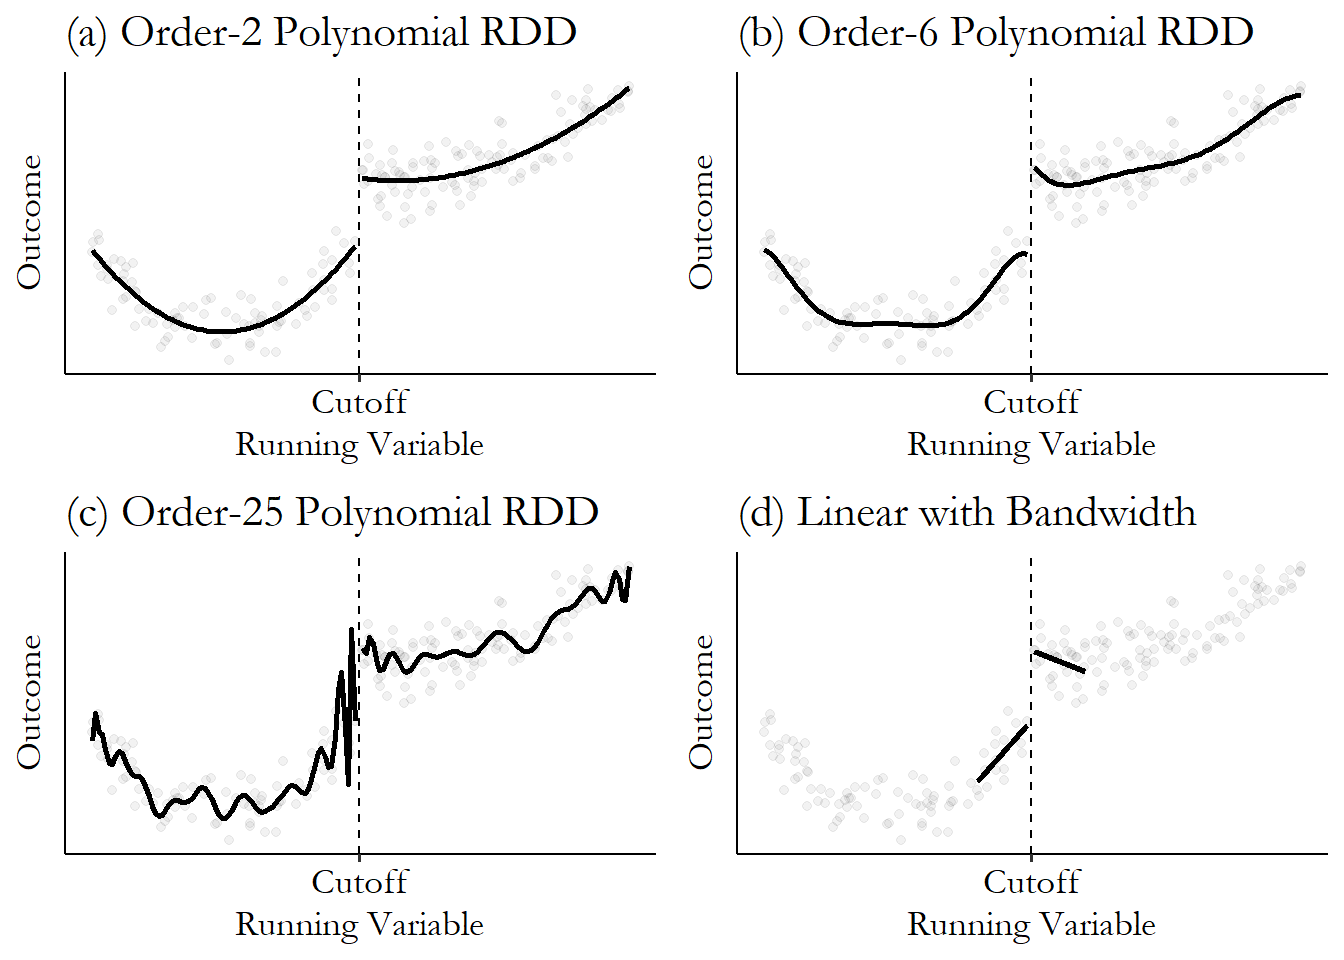 Four graphs using the same data from the previous two graphs. The time, the lines on each side of the cutoff are fit in four different ways. On the first graph, a second-order polynomial which fits well. On the second, a sixth-order polynomial which fits slightly better but also is a bit wiggly. On the third an order-25 polynomial which behaves erratically. On the fourth it's straight lines but estimated only using data near the cutoff.